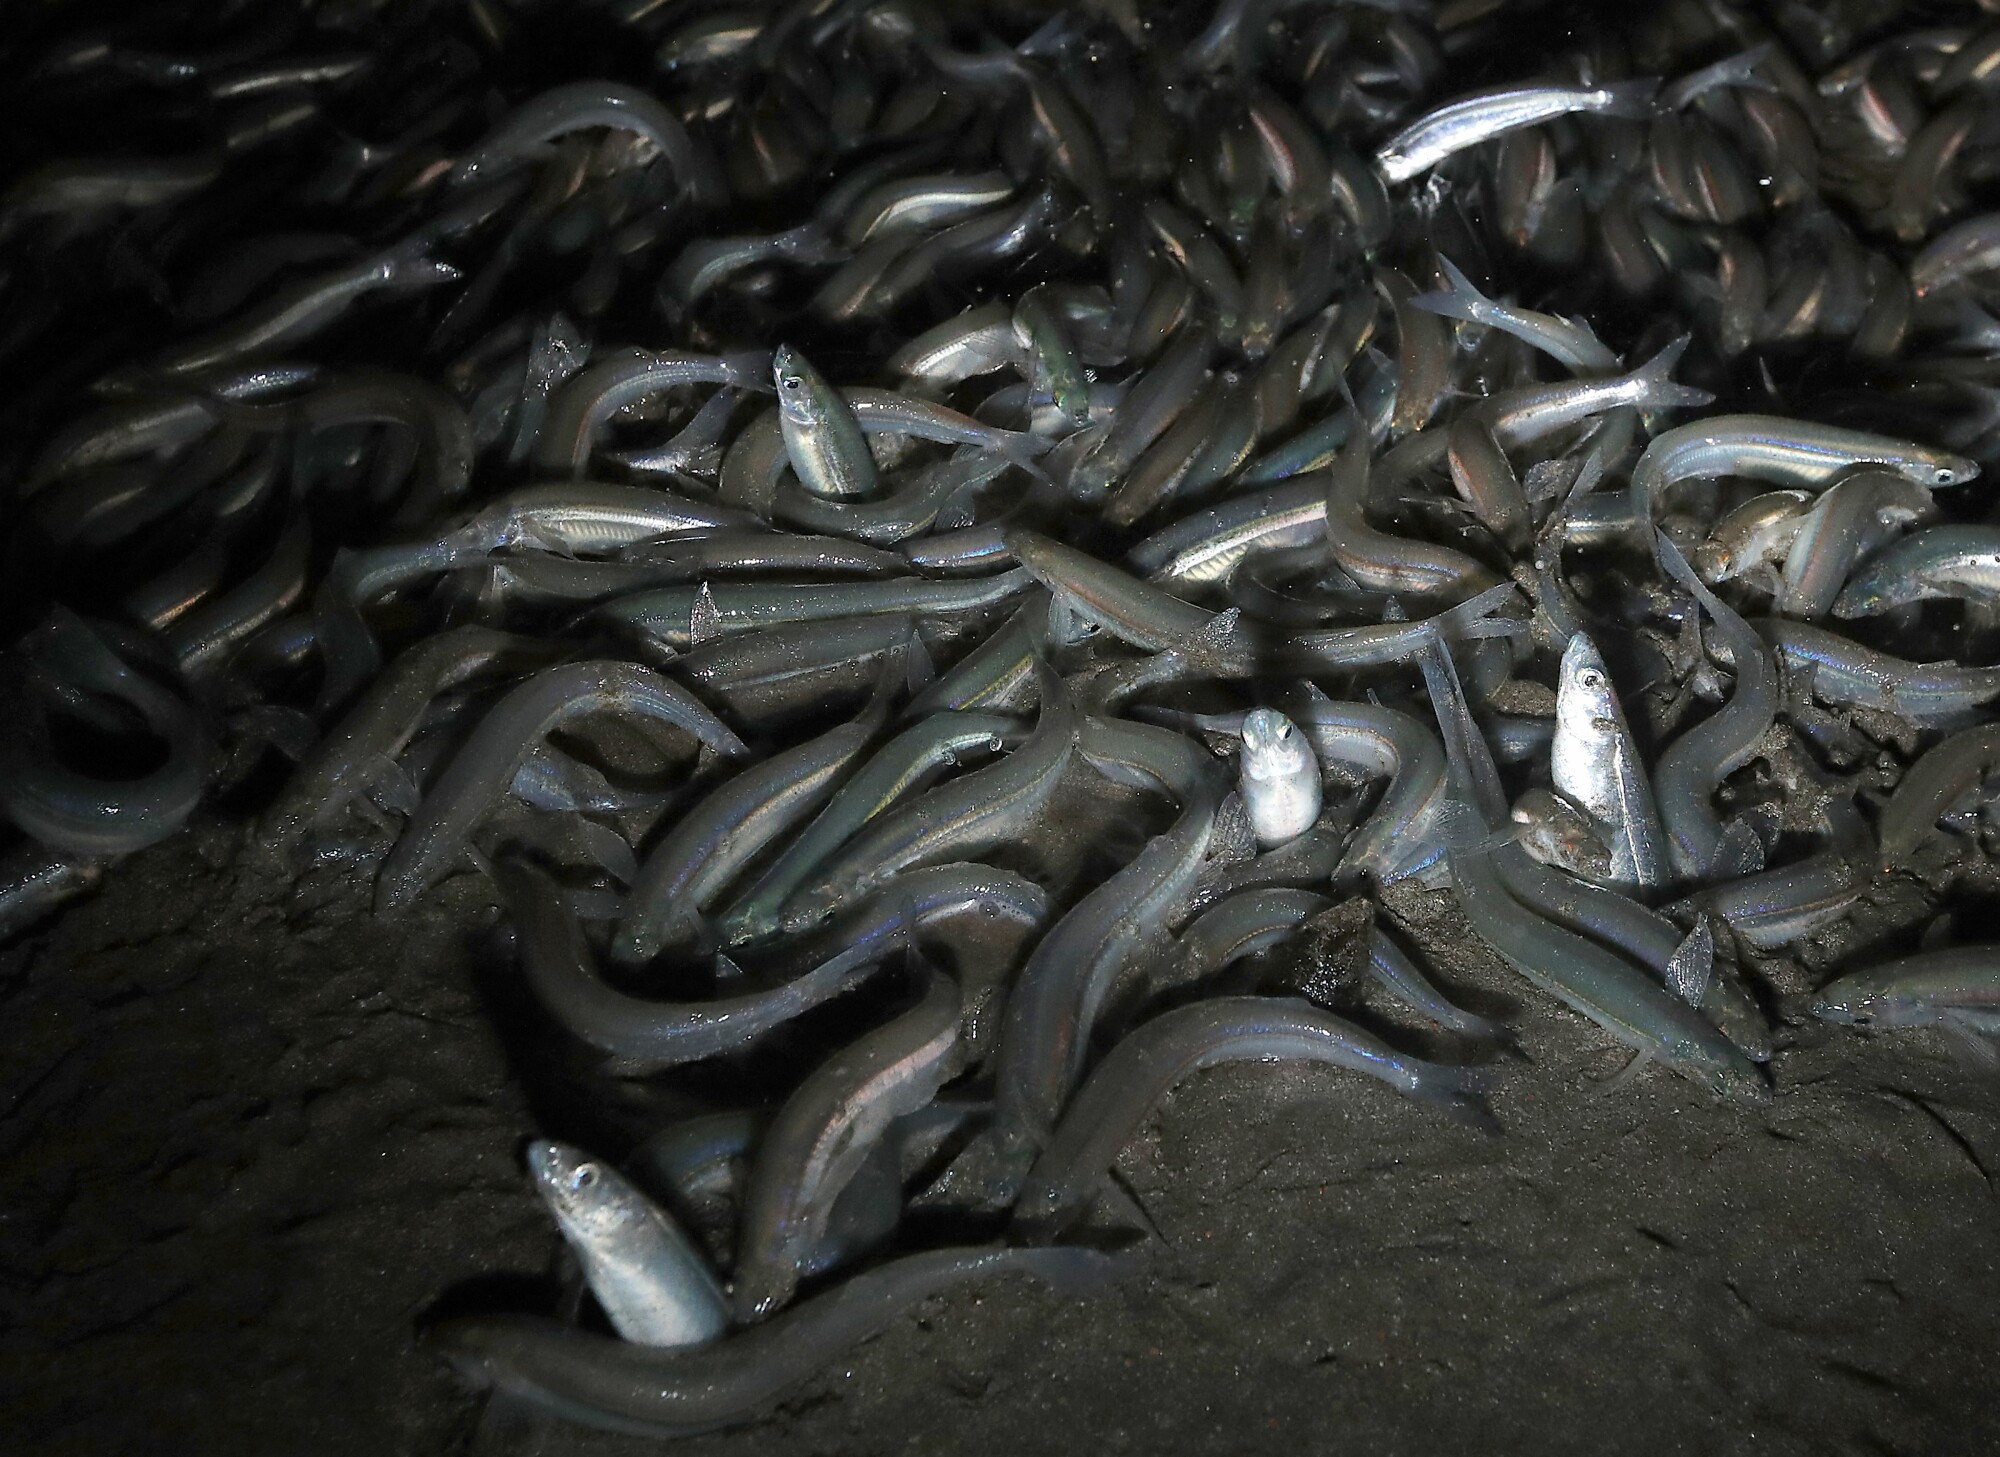 A pile of squirming grunion